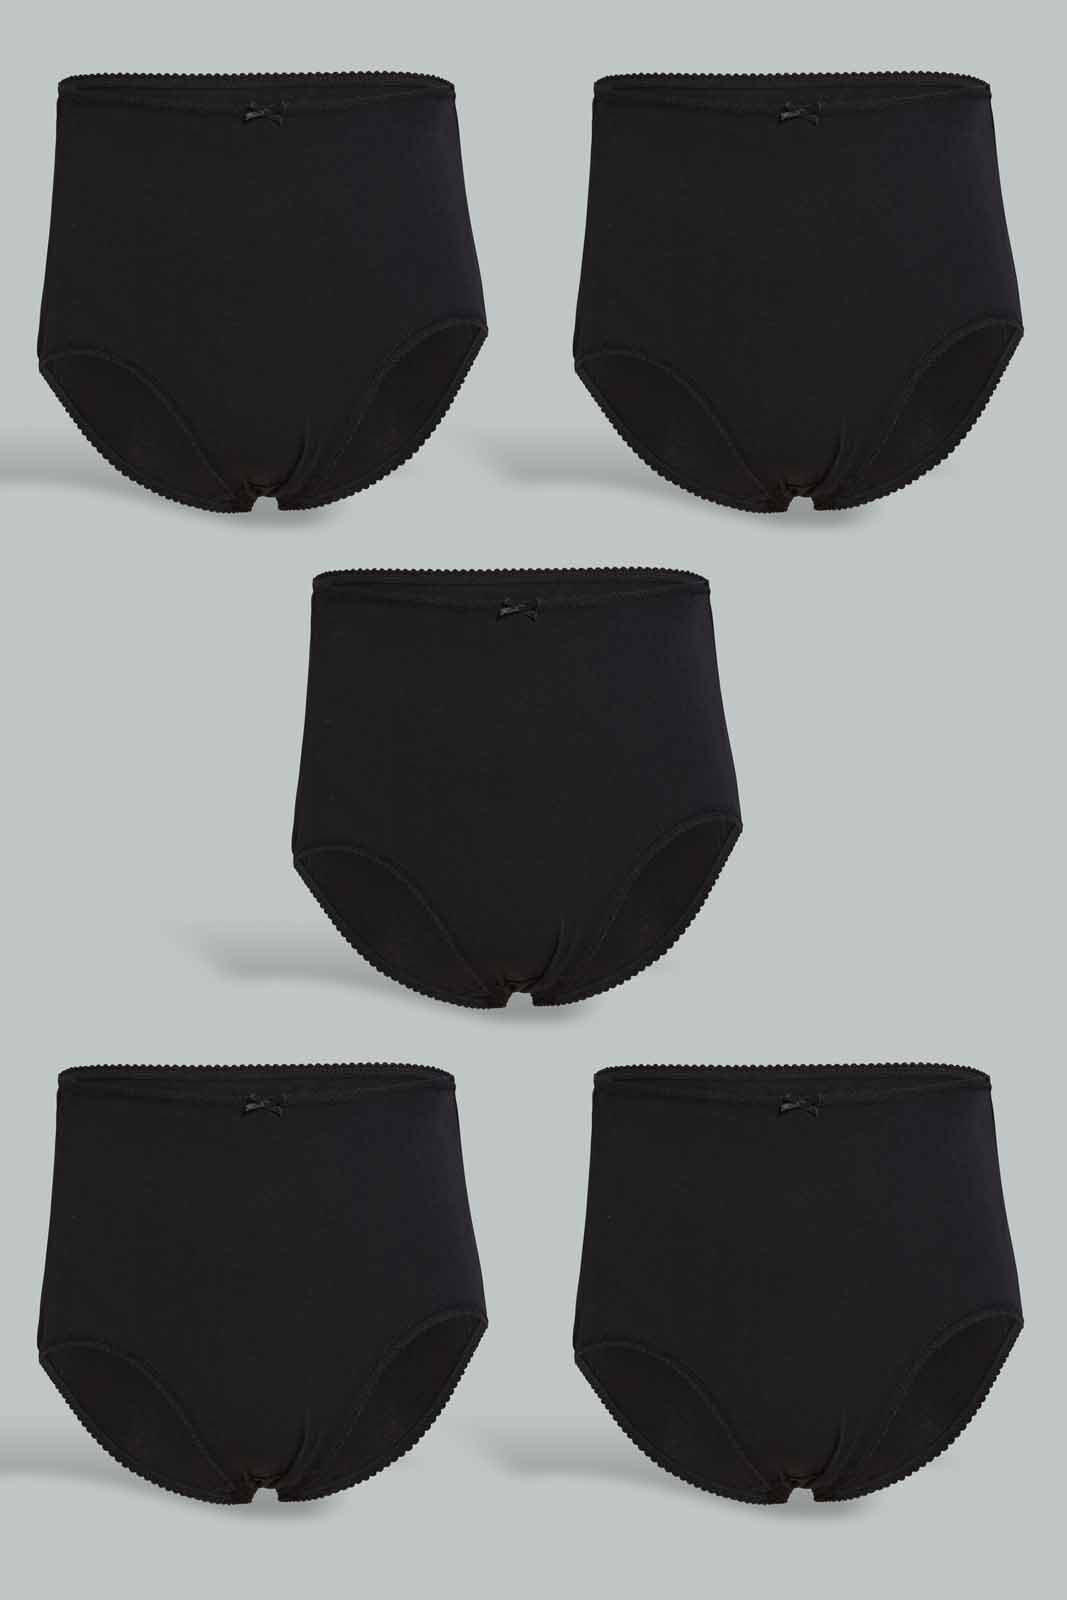 Black Mama Briefs For Women (Pack of 5)